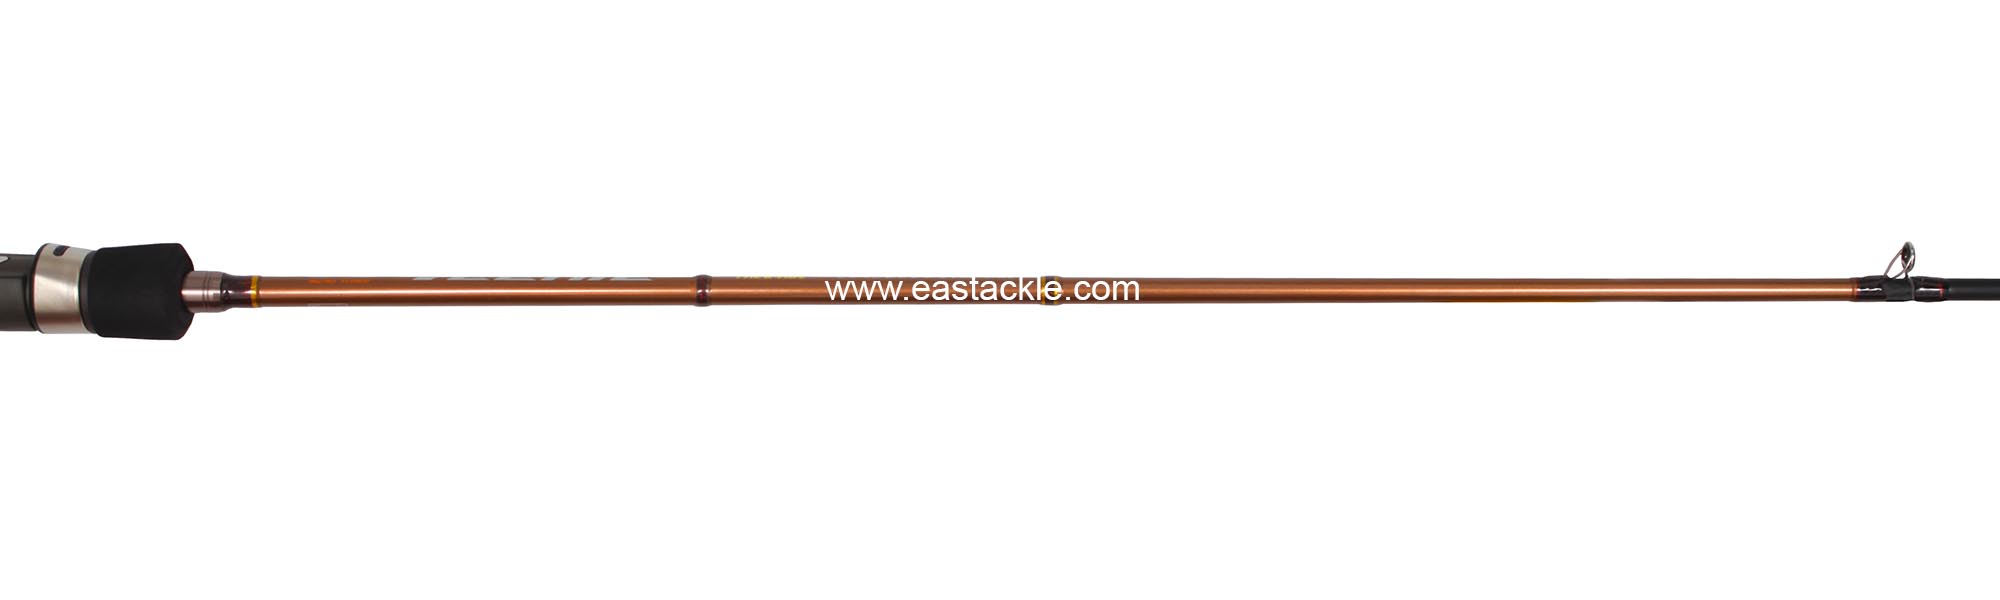 Storm - Teenie - TNC642UL - Bait Casting Rod - Reel Seat Fore Grip to Stripper Guide (Side View) | Eastackle